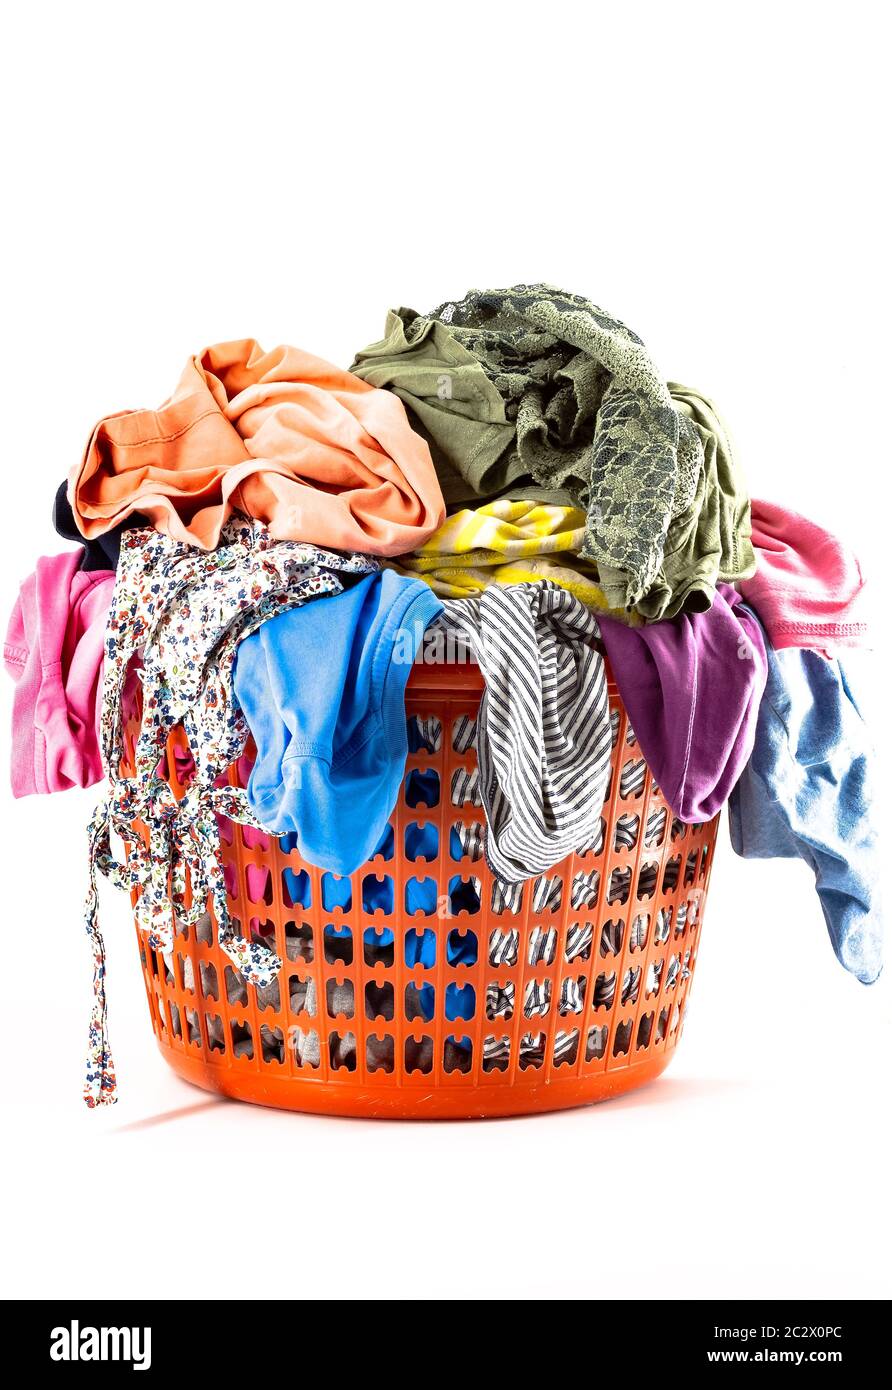 Red plastic laundry basket full of colorful clothes Stock Photo